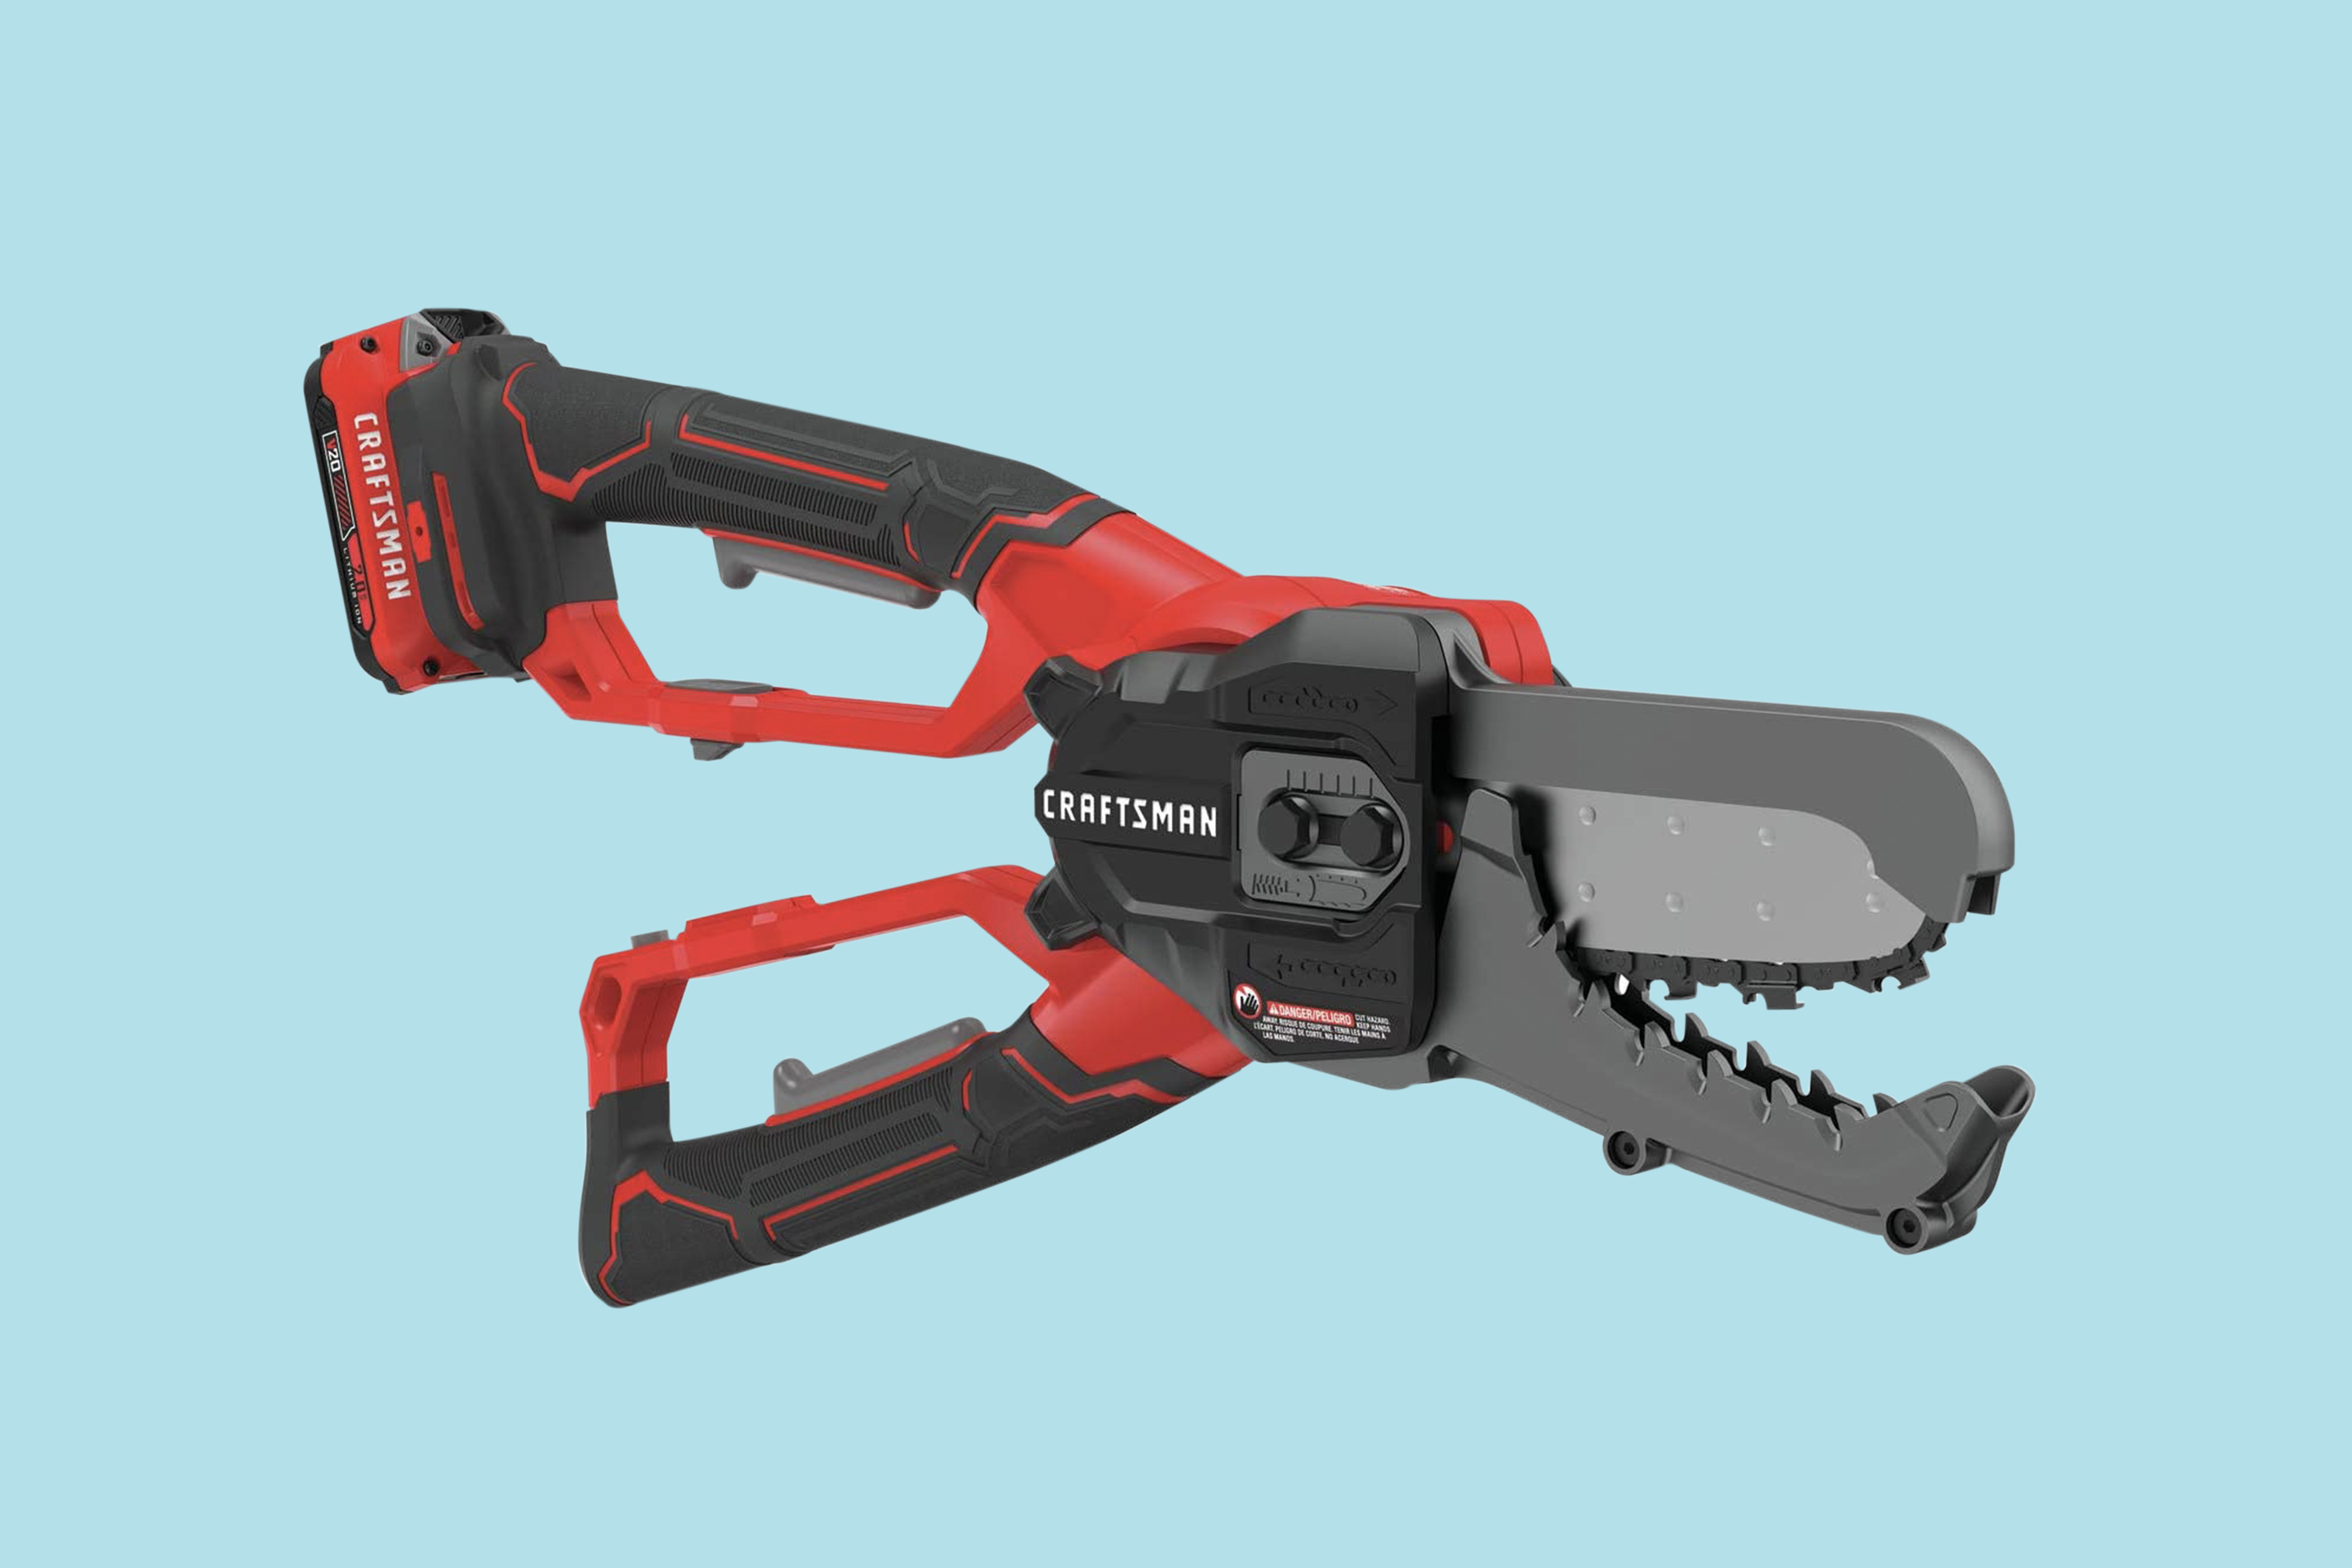 The Best Mini Chainsaws for Your Money | Money